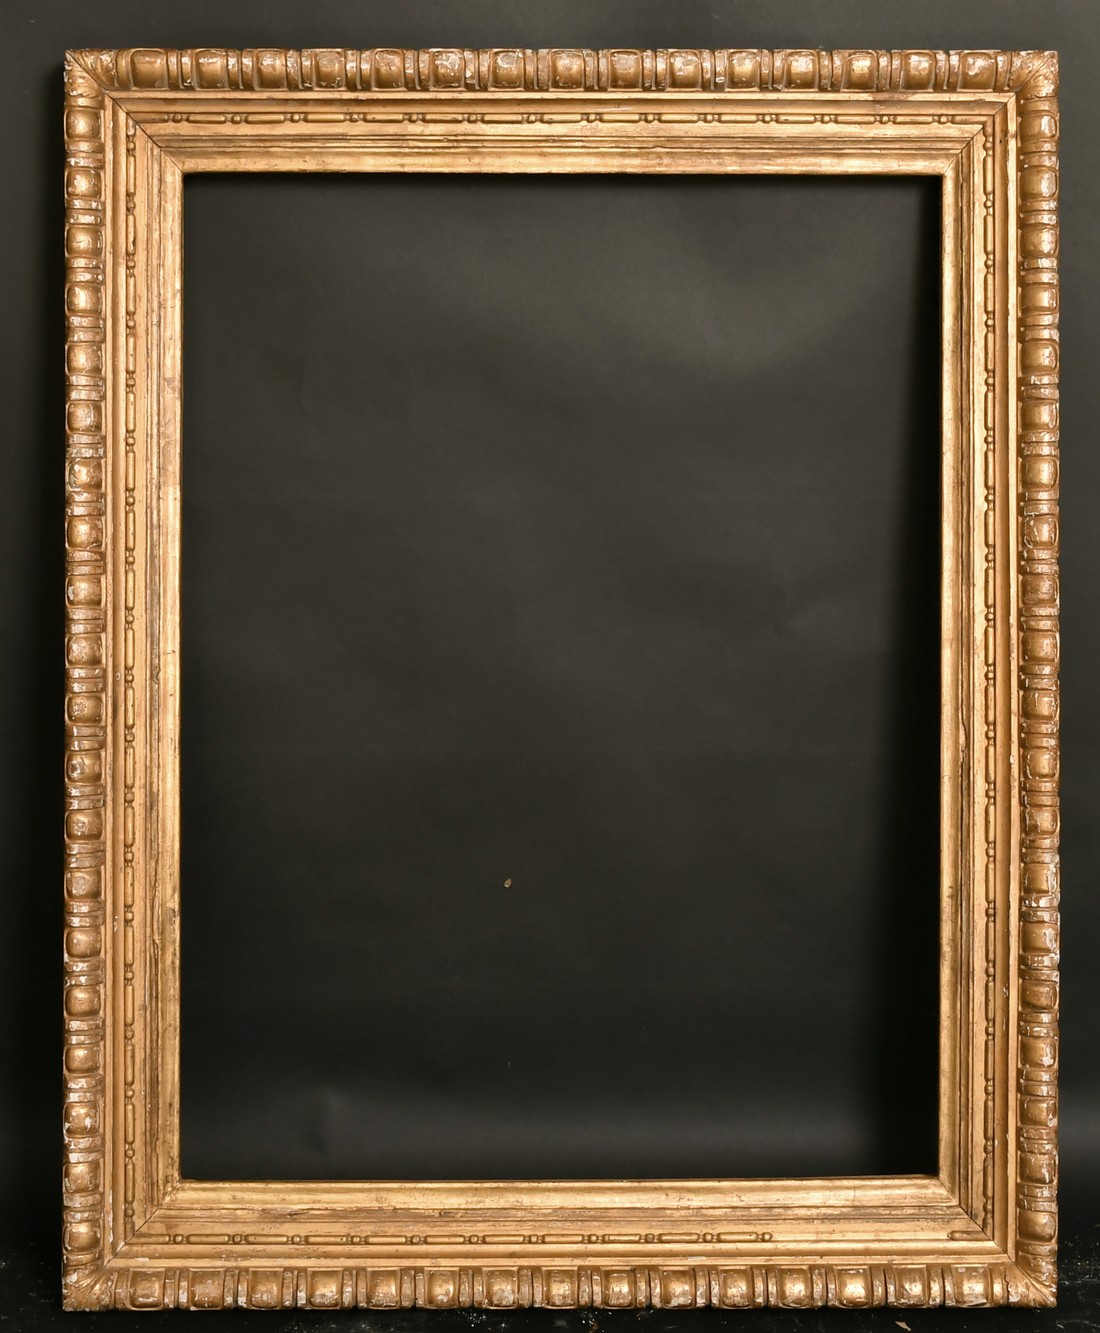 A 19th century carved giltwood frame, rebate size 30" x 23", 76.25 x 58.5 cm. - Image 2 of 3